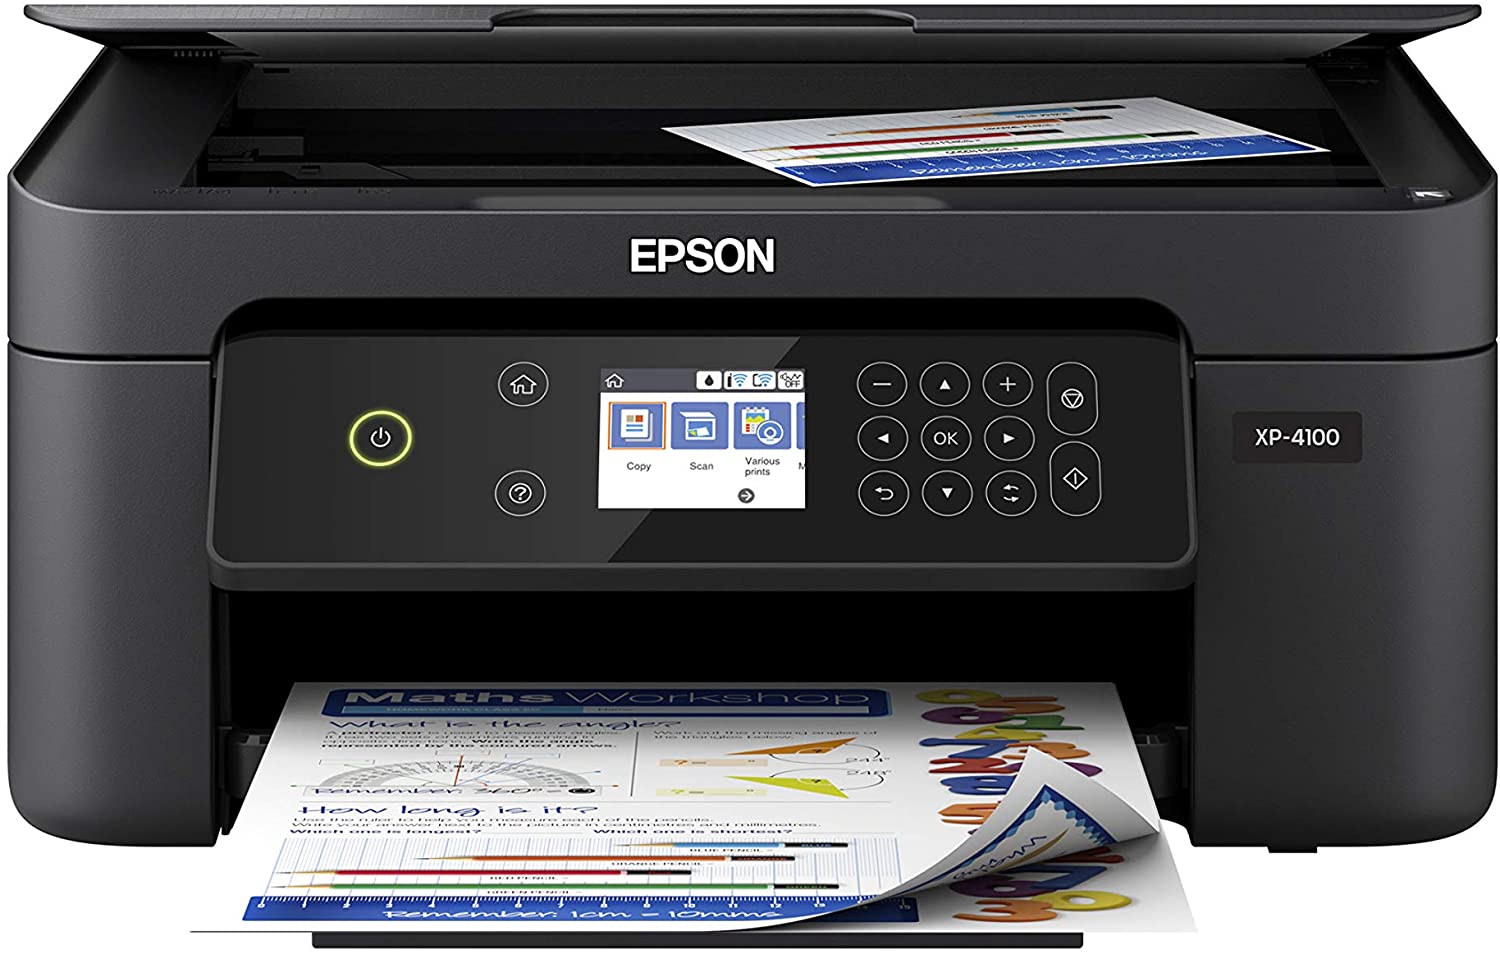 Epson Expression Home XP-4100 Wireless Color Printer with Scanner and Copier uk reviews